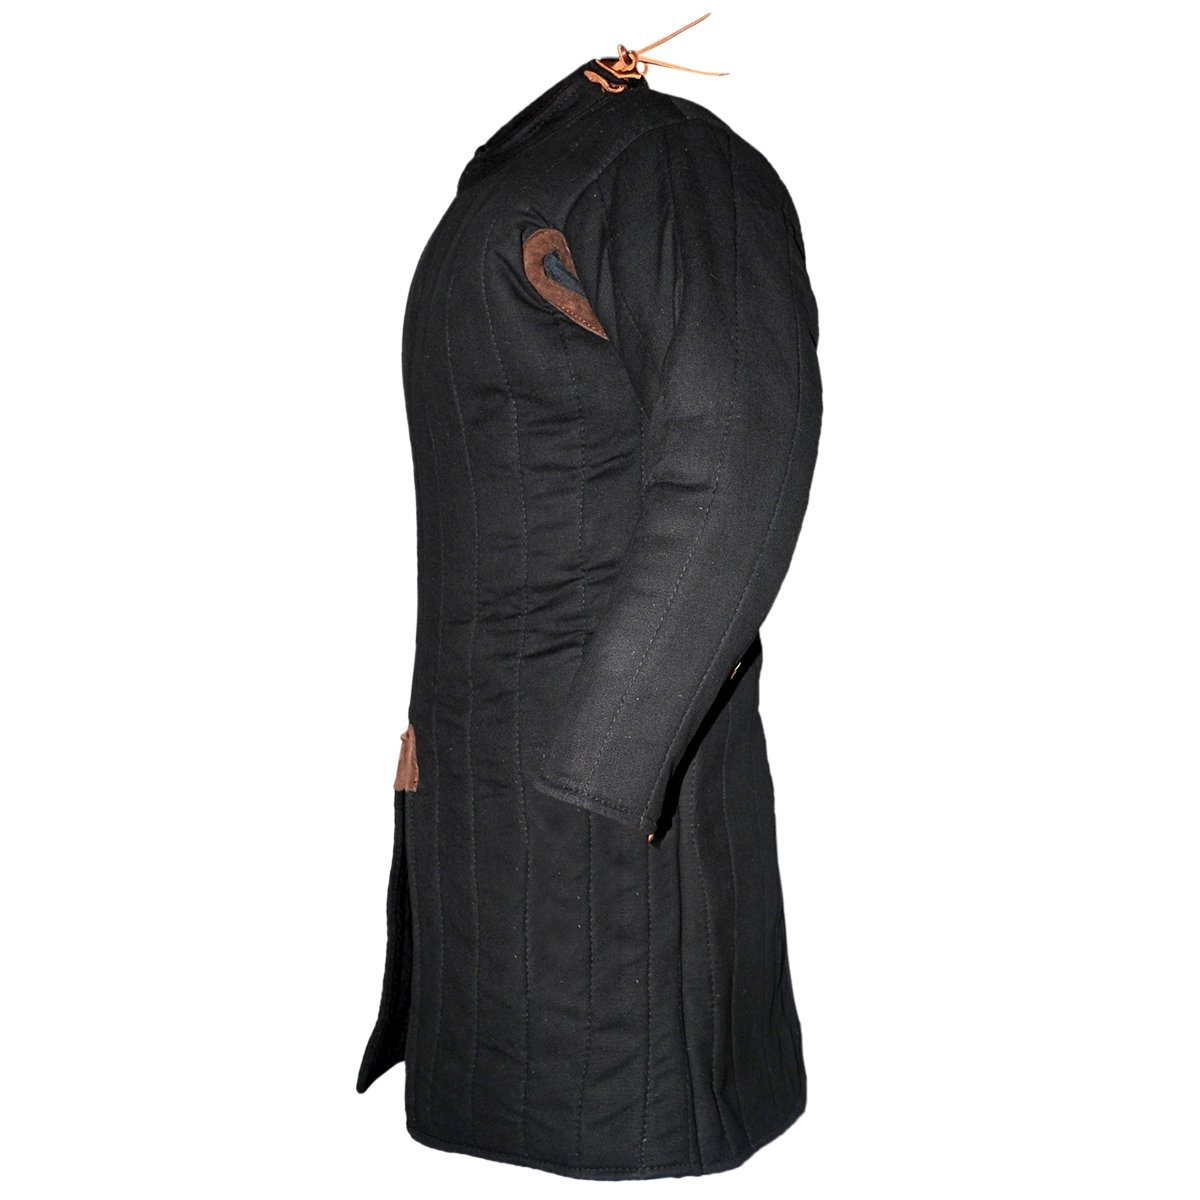 Closed Gambeson Late 12th C./Early 13th C., Black Size XXL